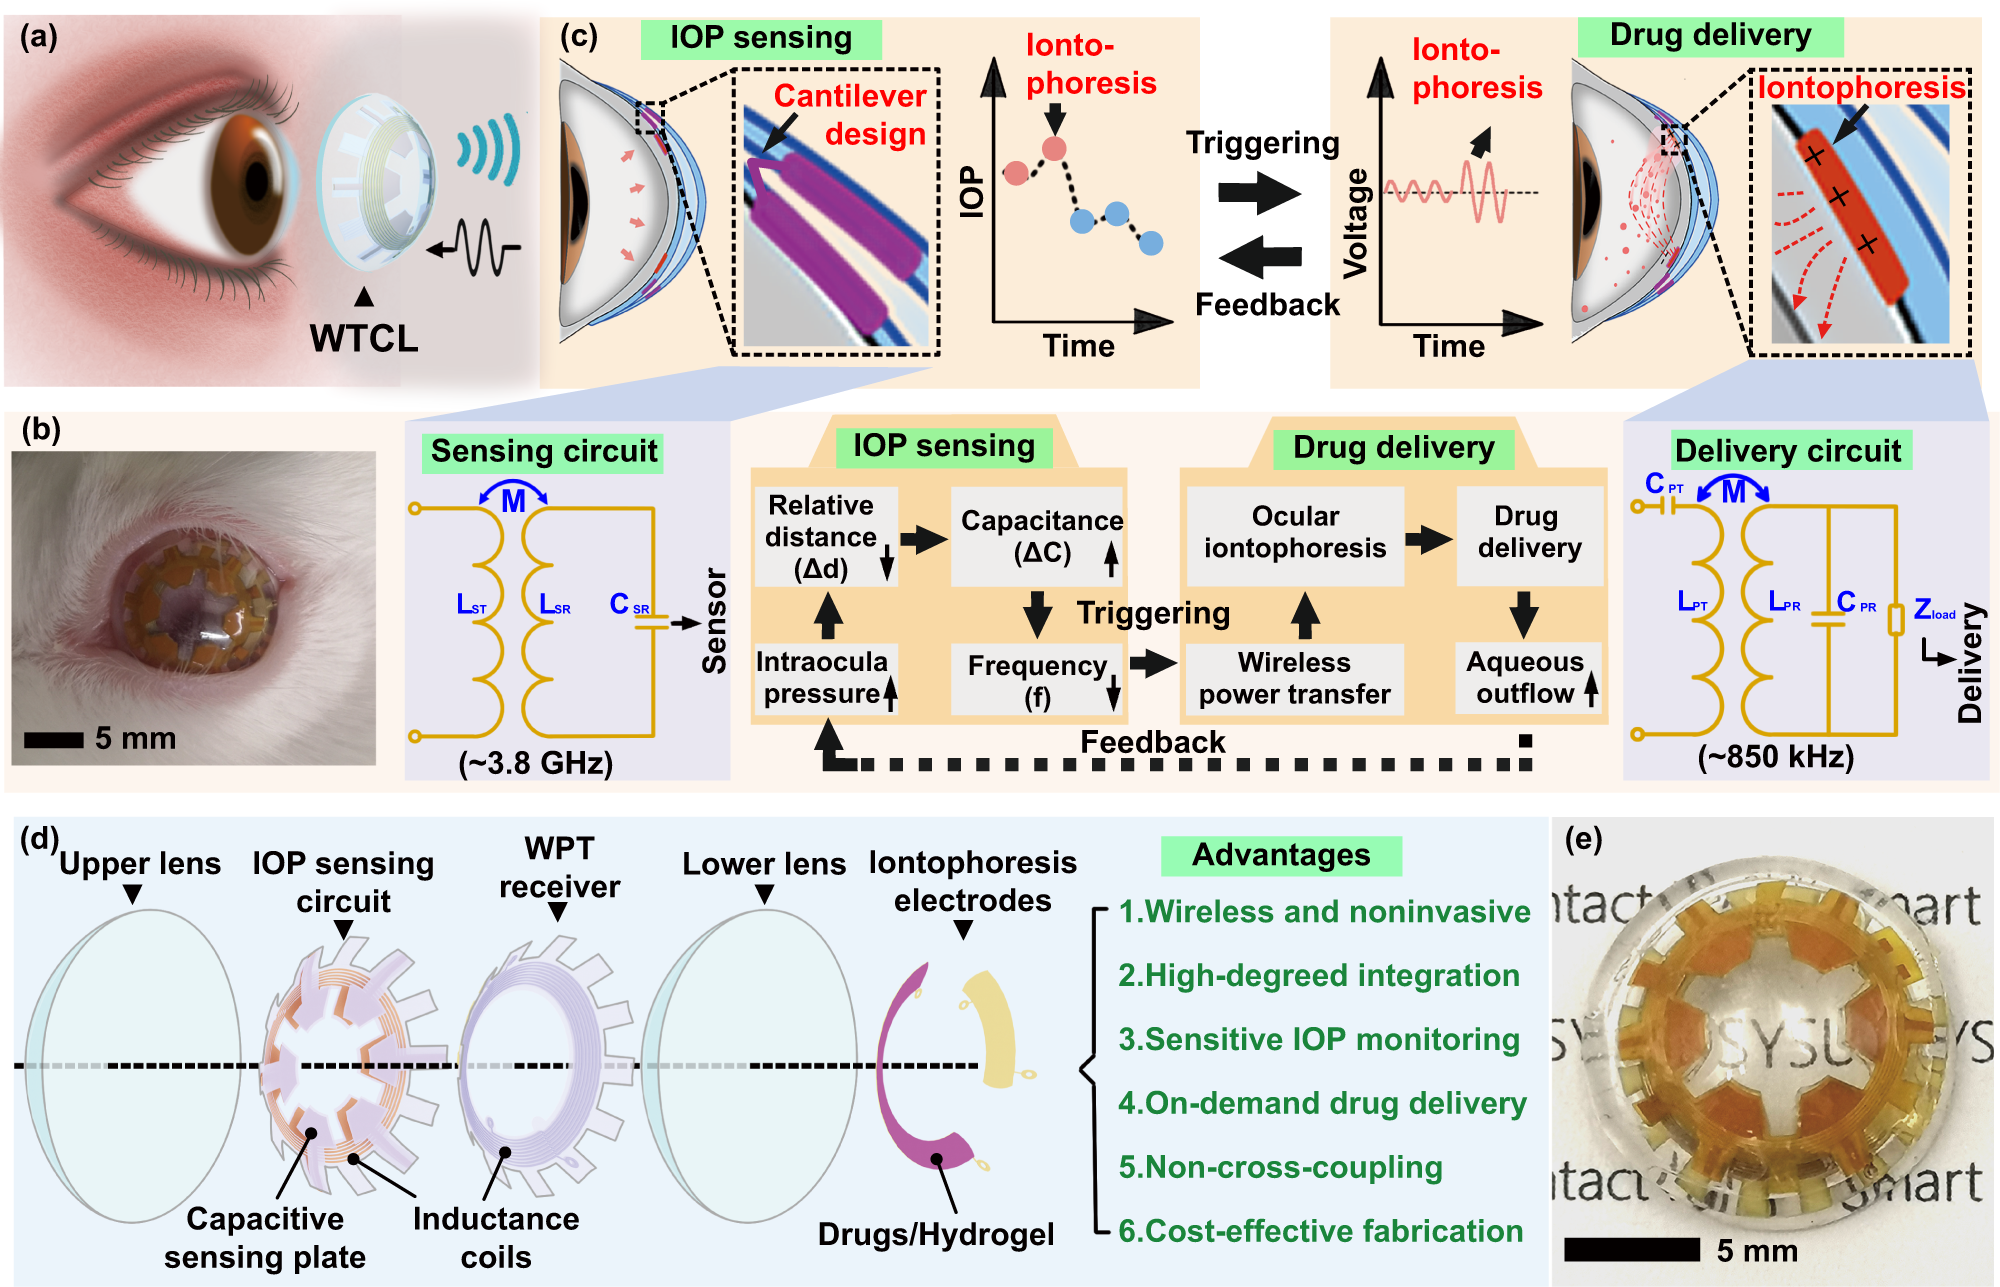 kreupel Omleiden Alarmerend Intelligent wireless theranostic contact lens for electrical sensing and  regulation of intraocular pressure | Nature Communications